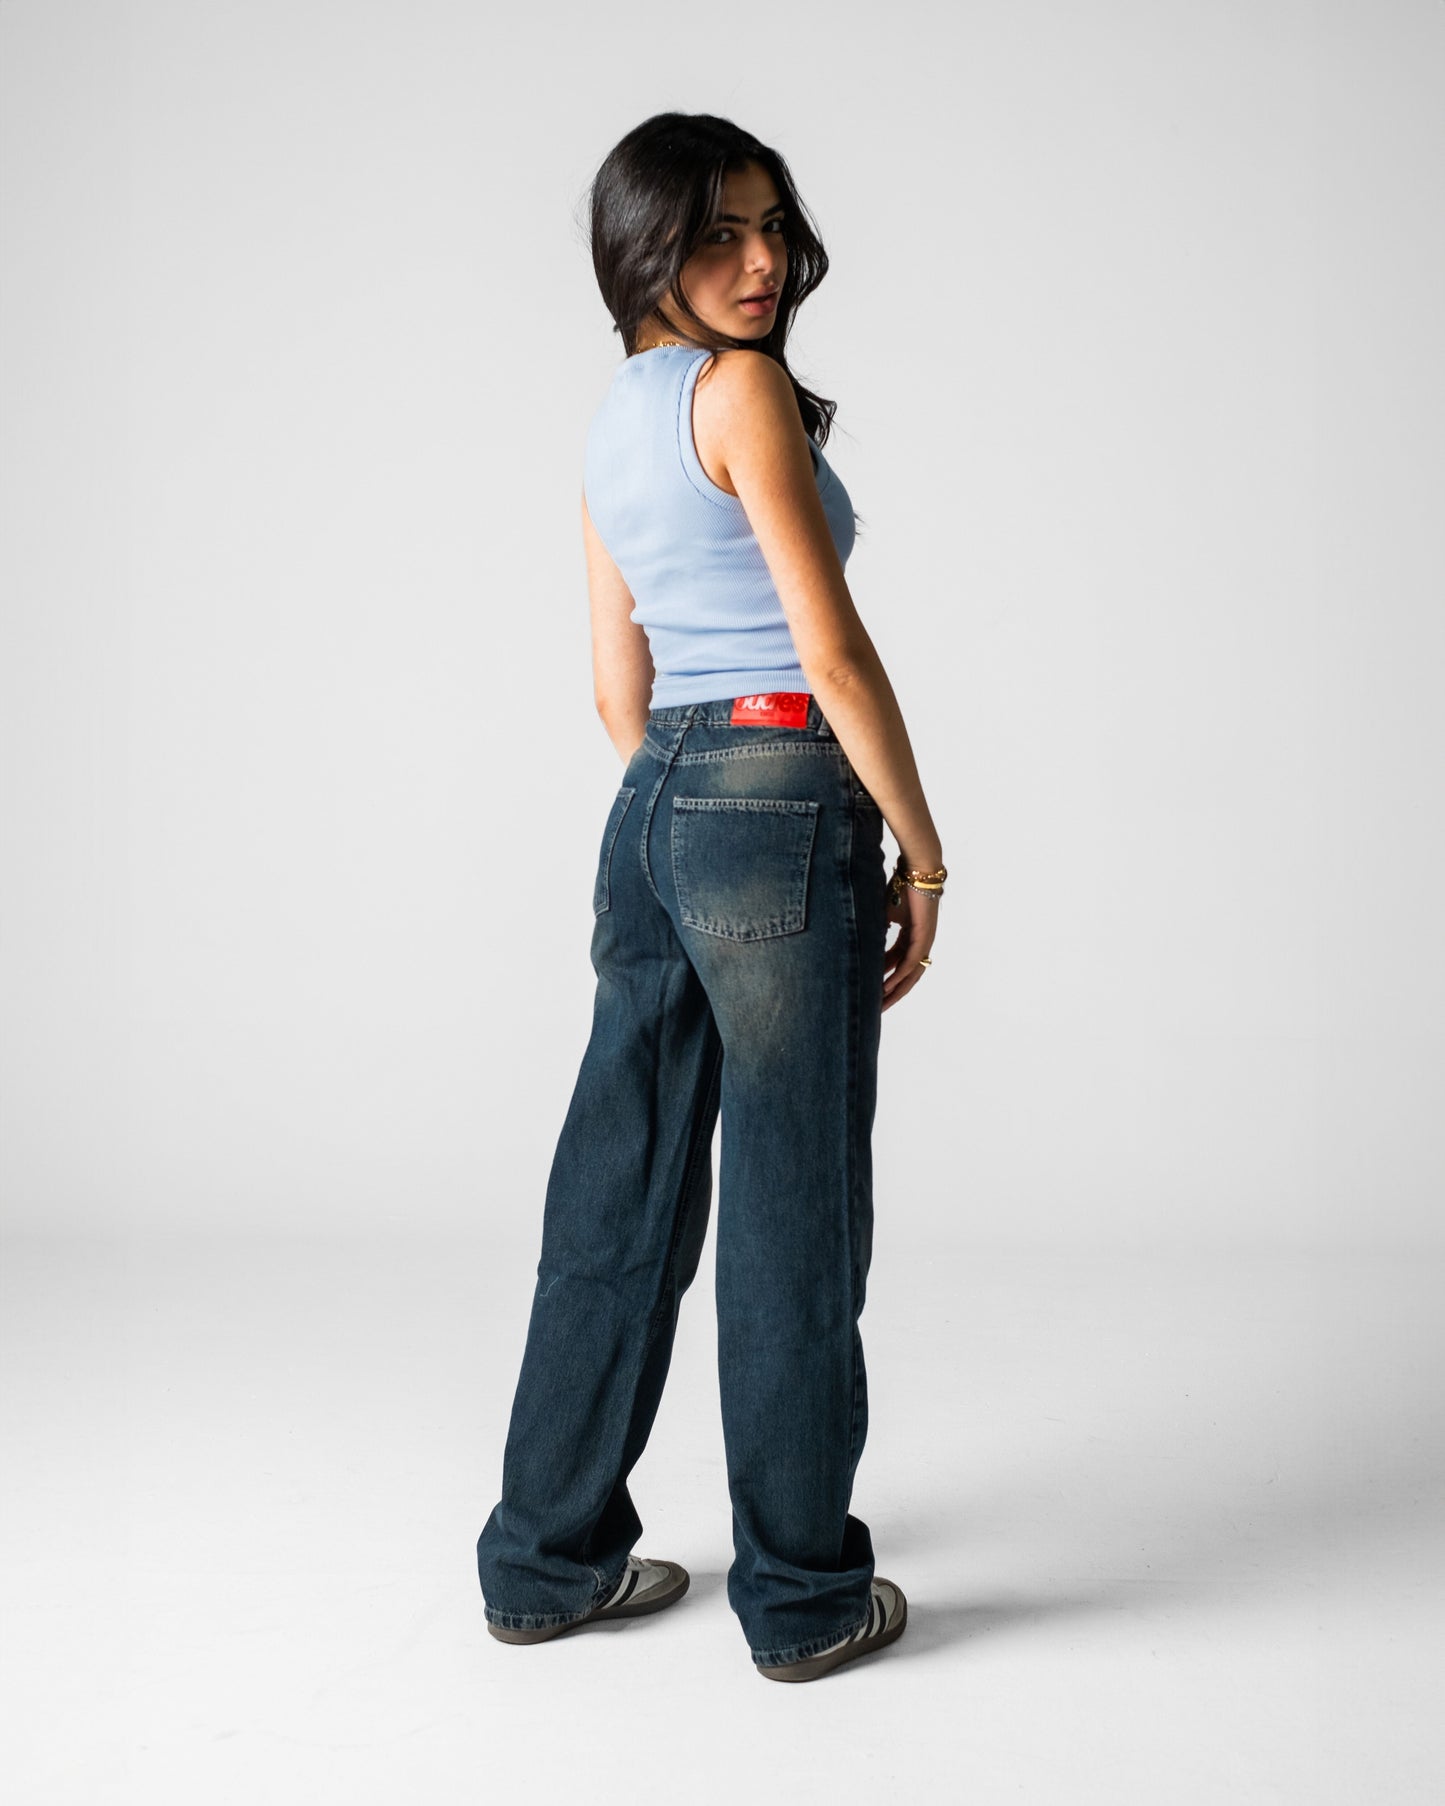 90's Fit Women's Jeans (Stone Washed Blue)